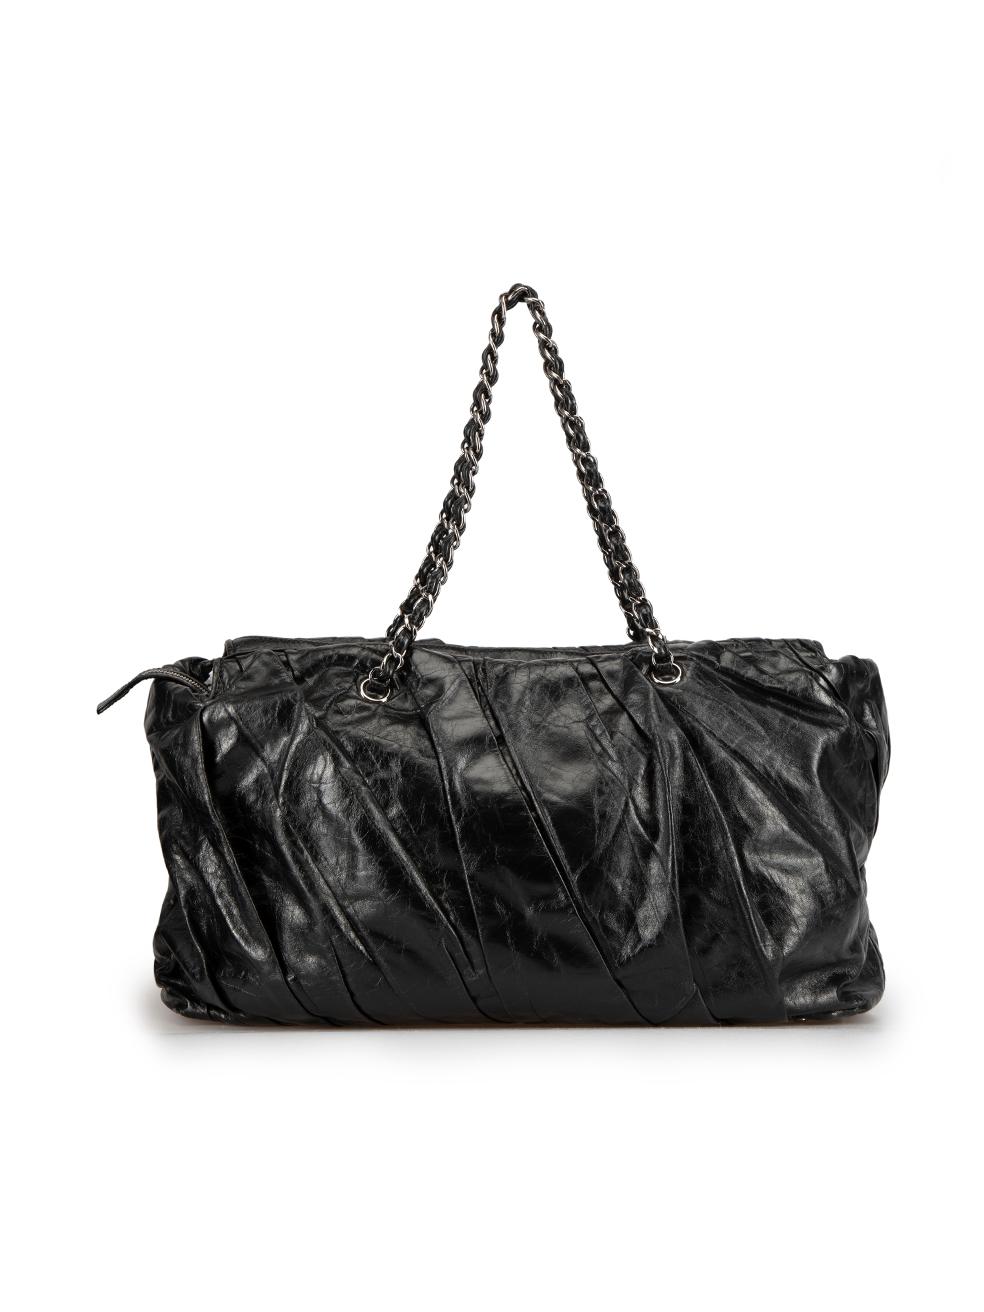 Chanel 2009-2010 Black East West Twisted Glazed Shoulder Bag In Good Condition For Sale In London, GB